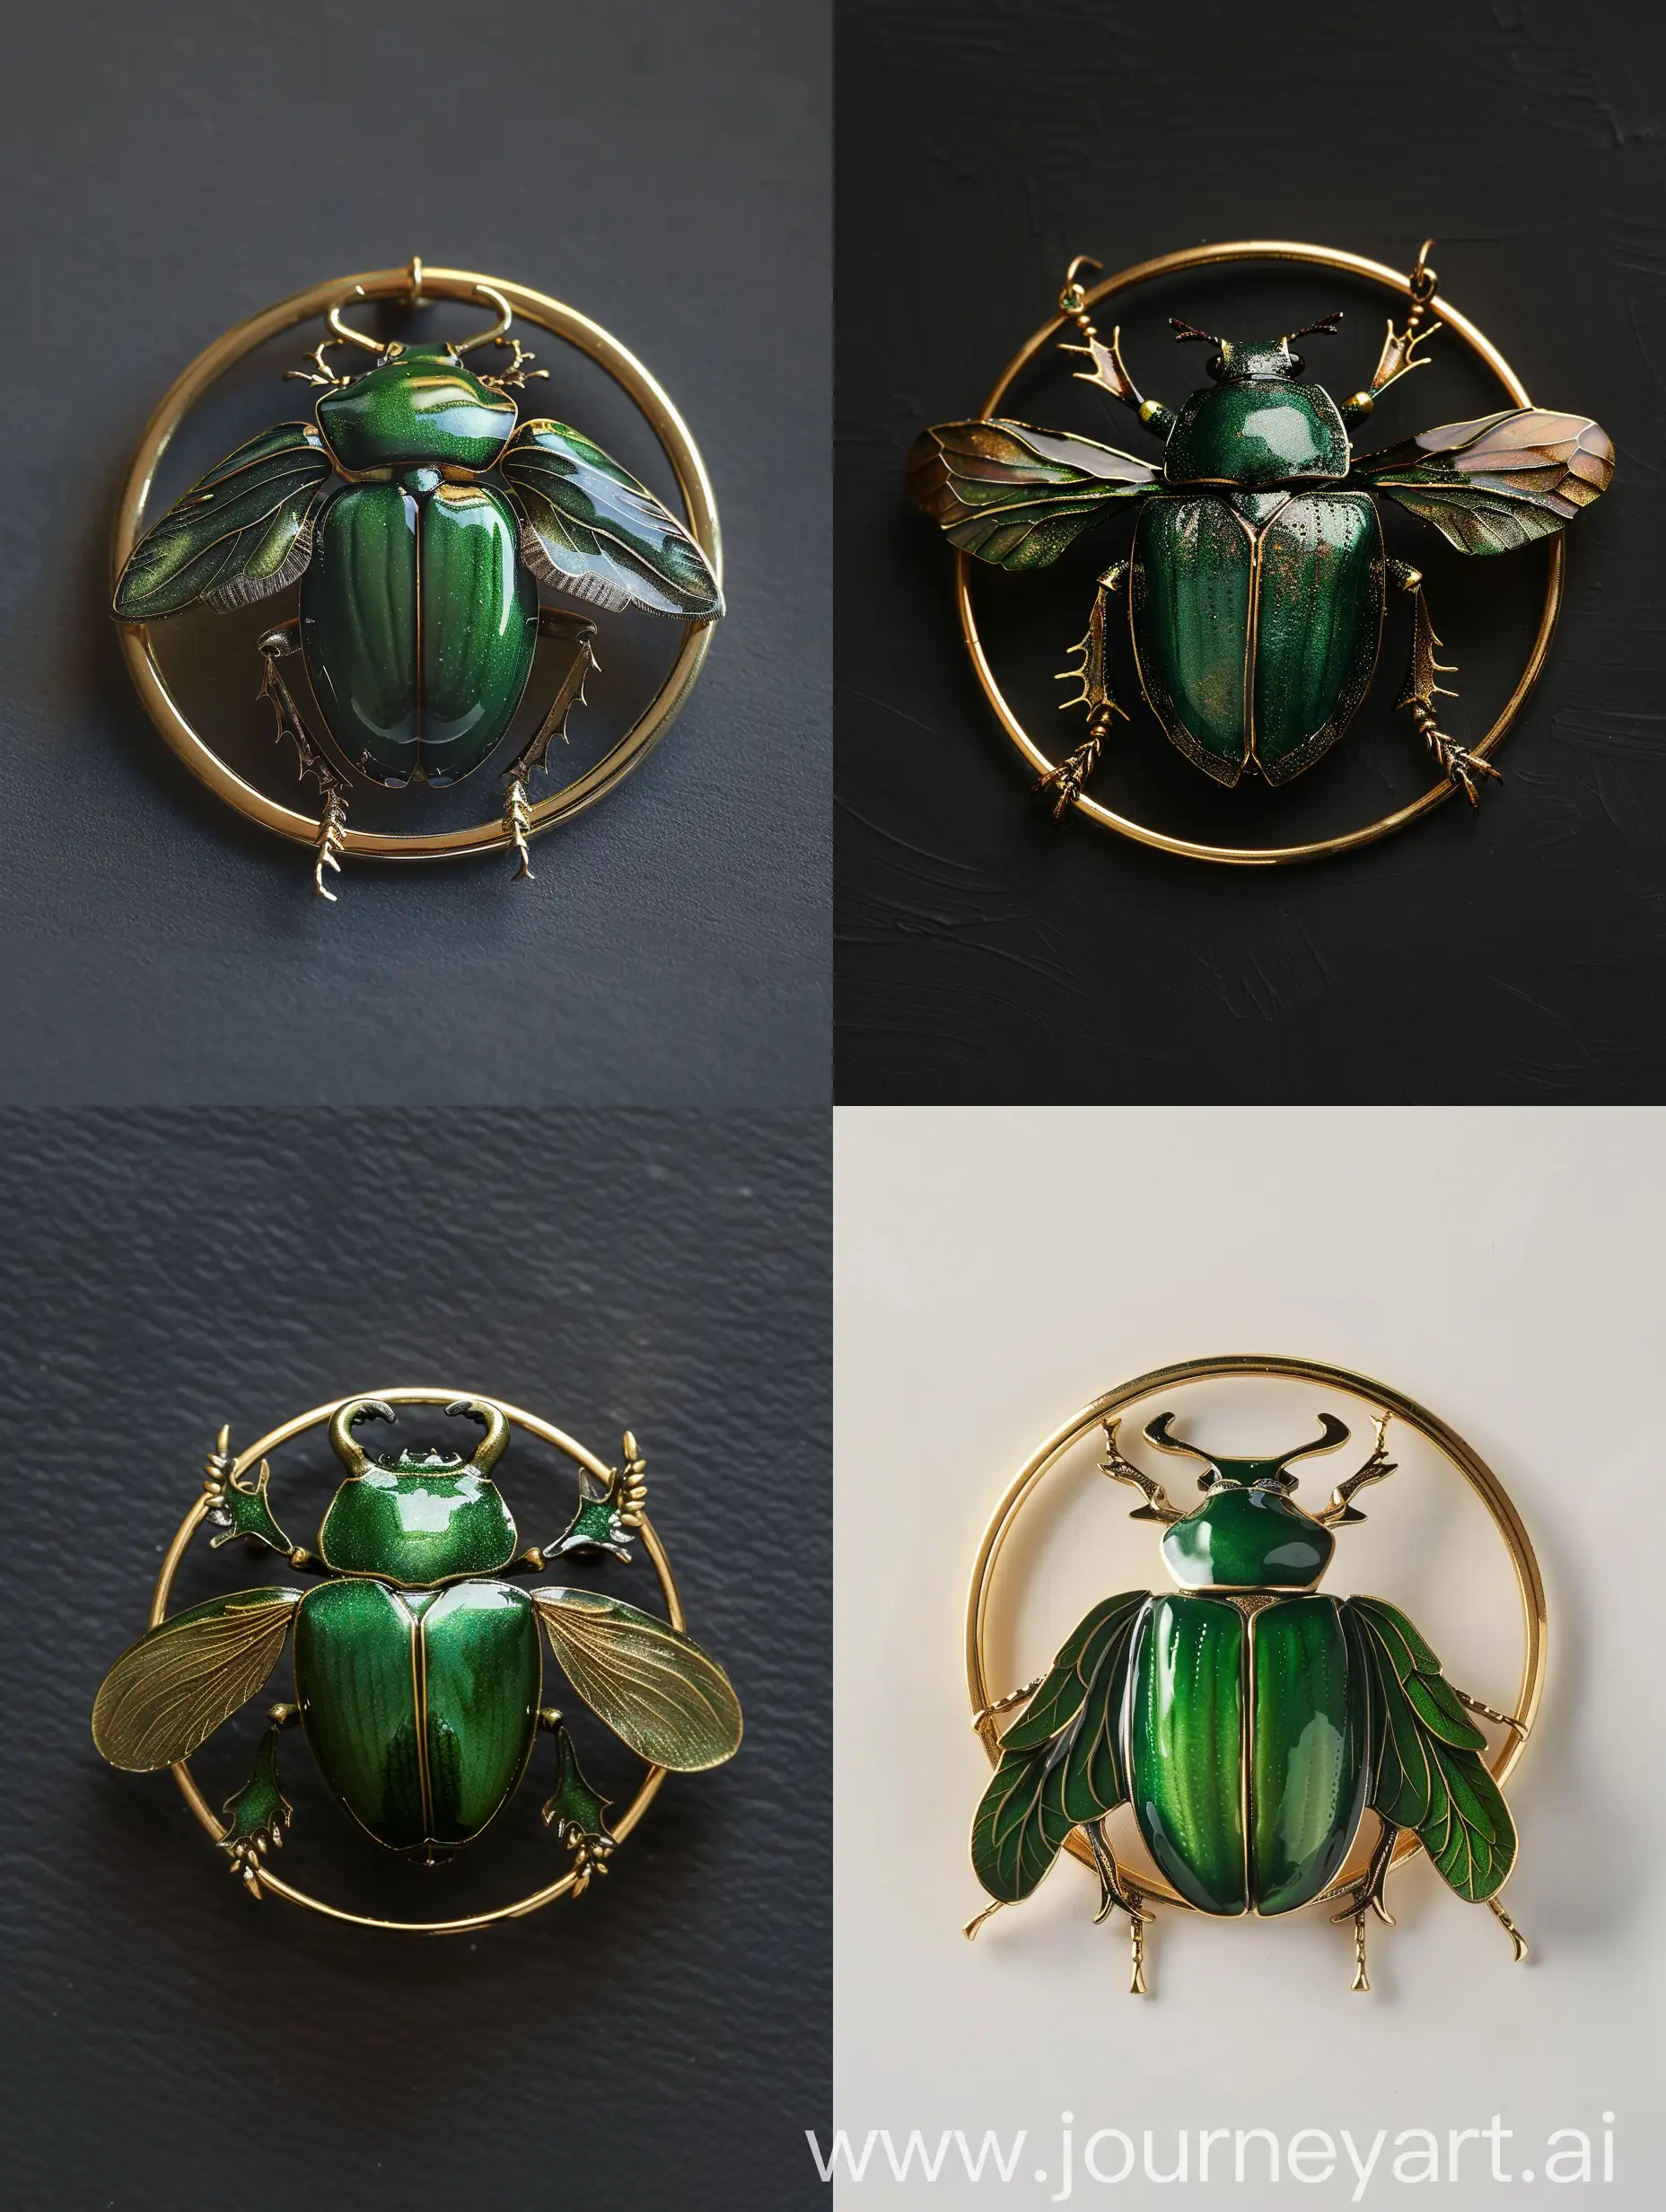 Exquisite-Green-Beetle-Scarab-Brooch-with-Open-Wings-in-Gold-Circle